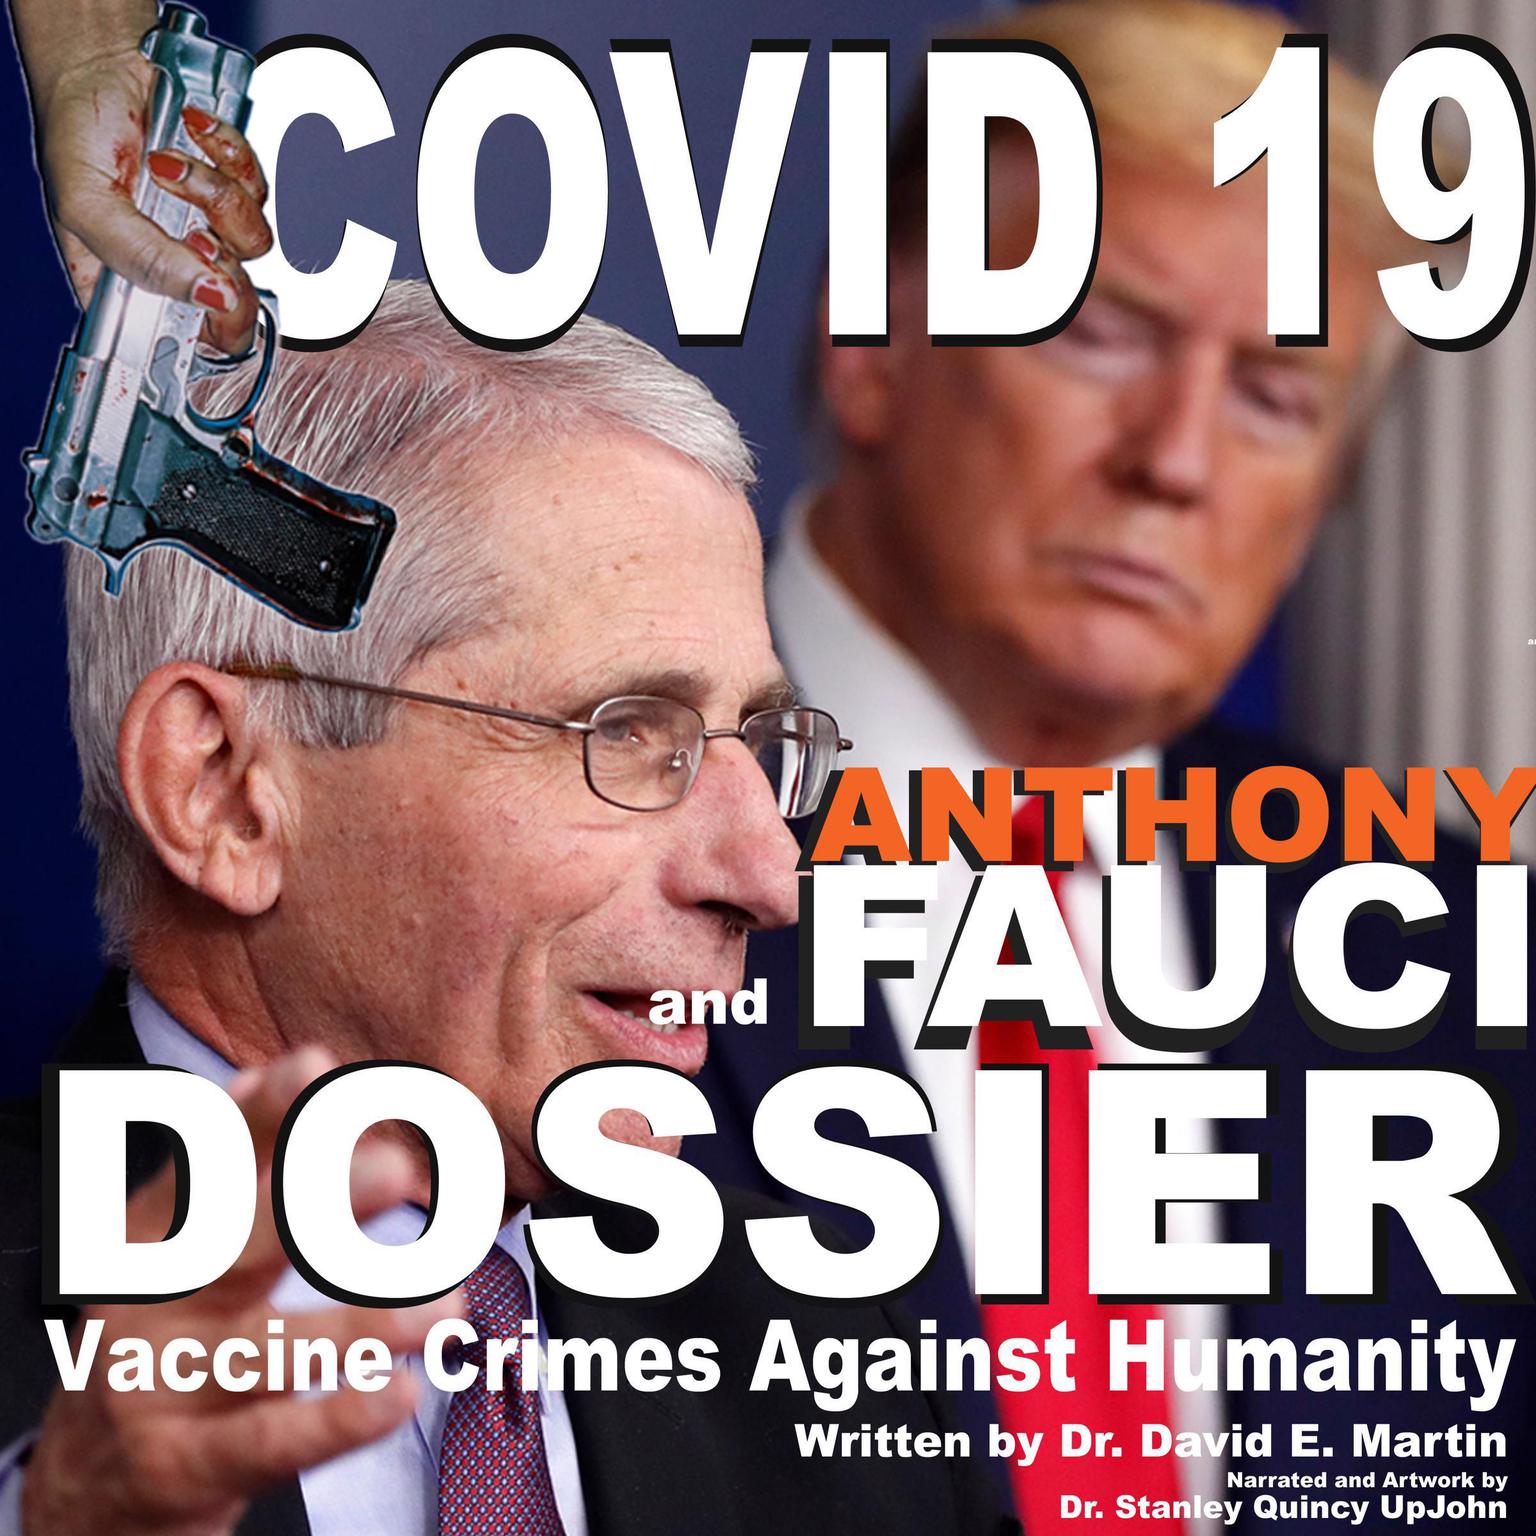 Covid 19 and Anthony Fauci Dossier (Abridged) Audiobook, by David E. Martin